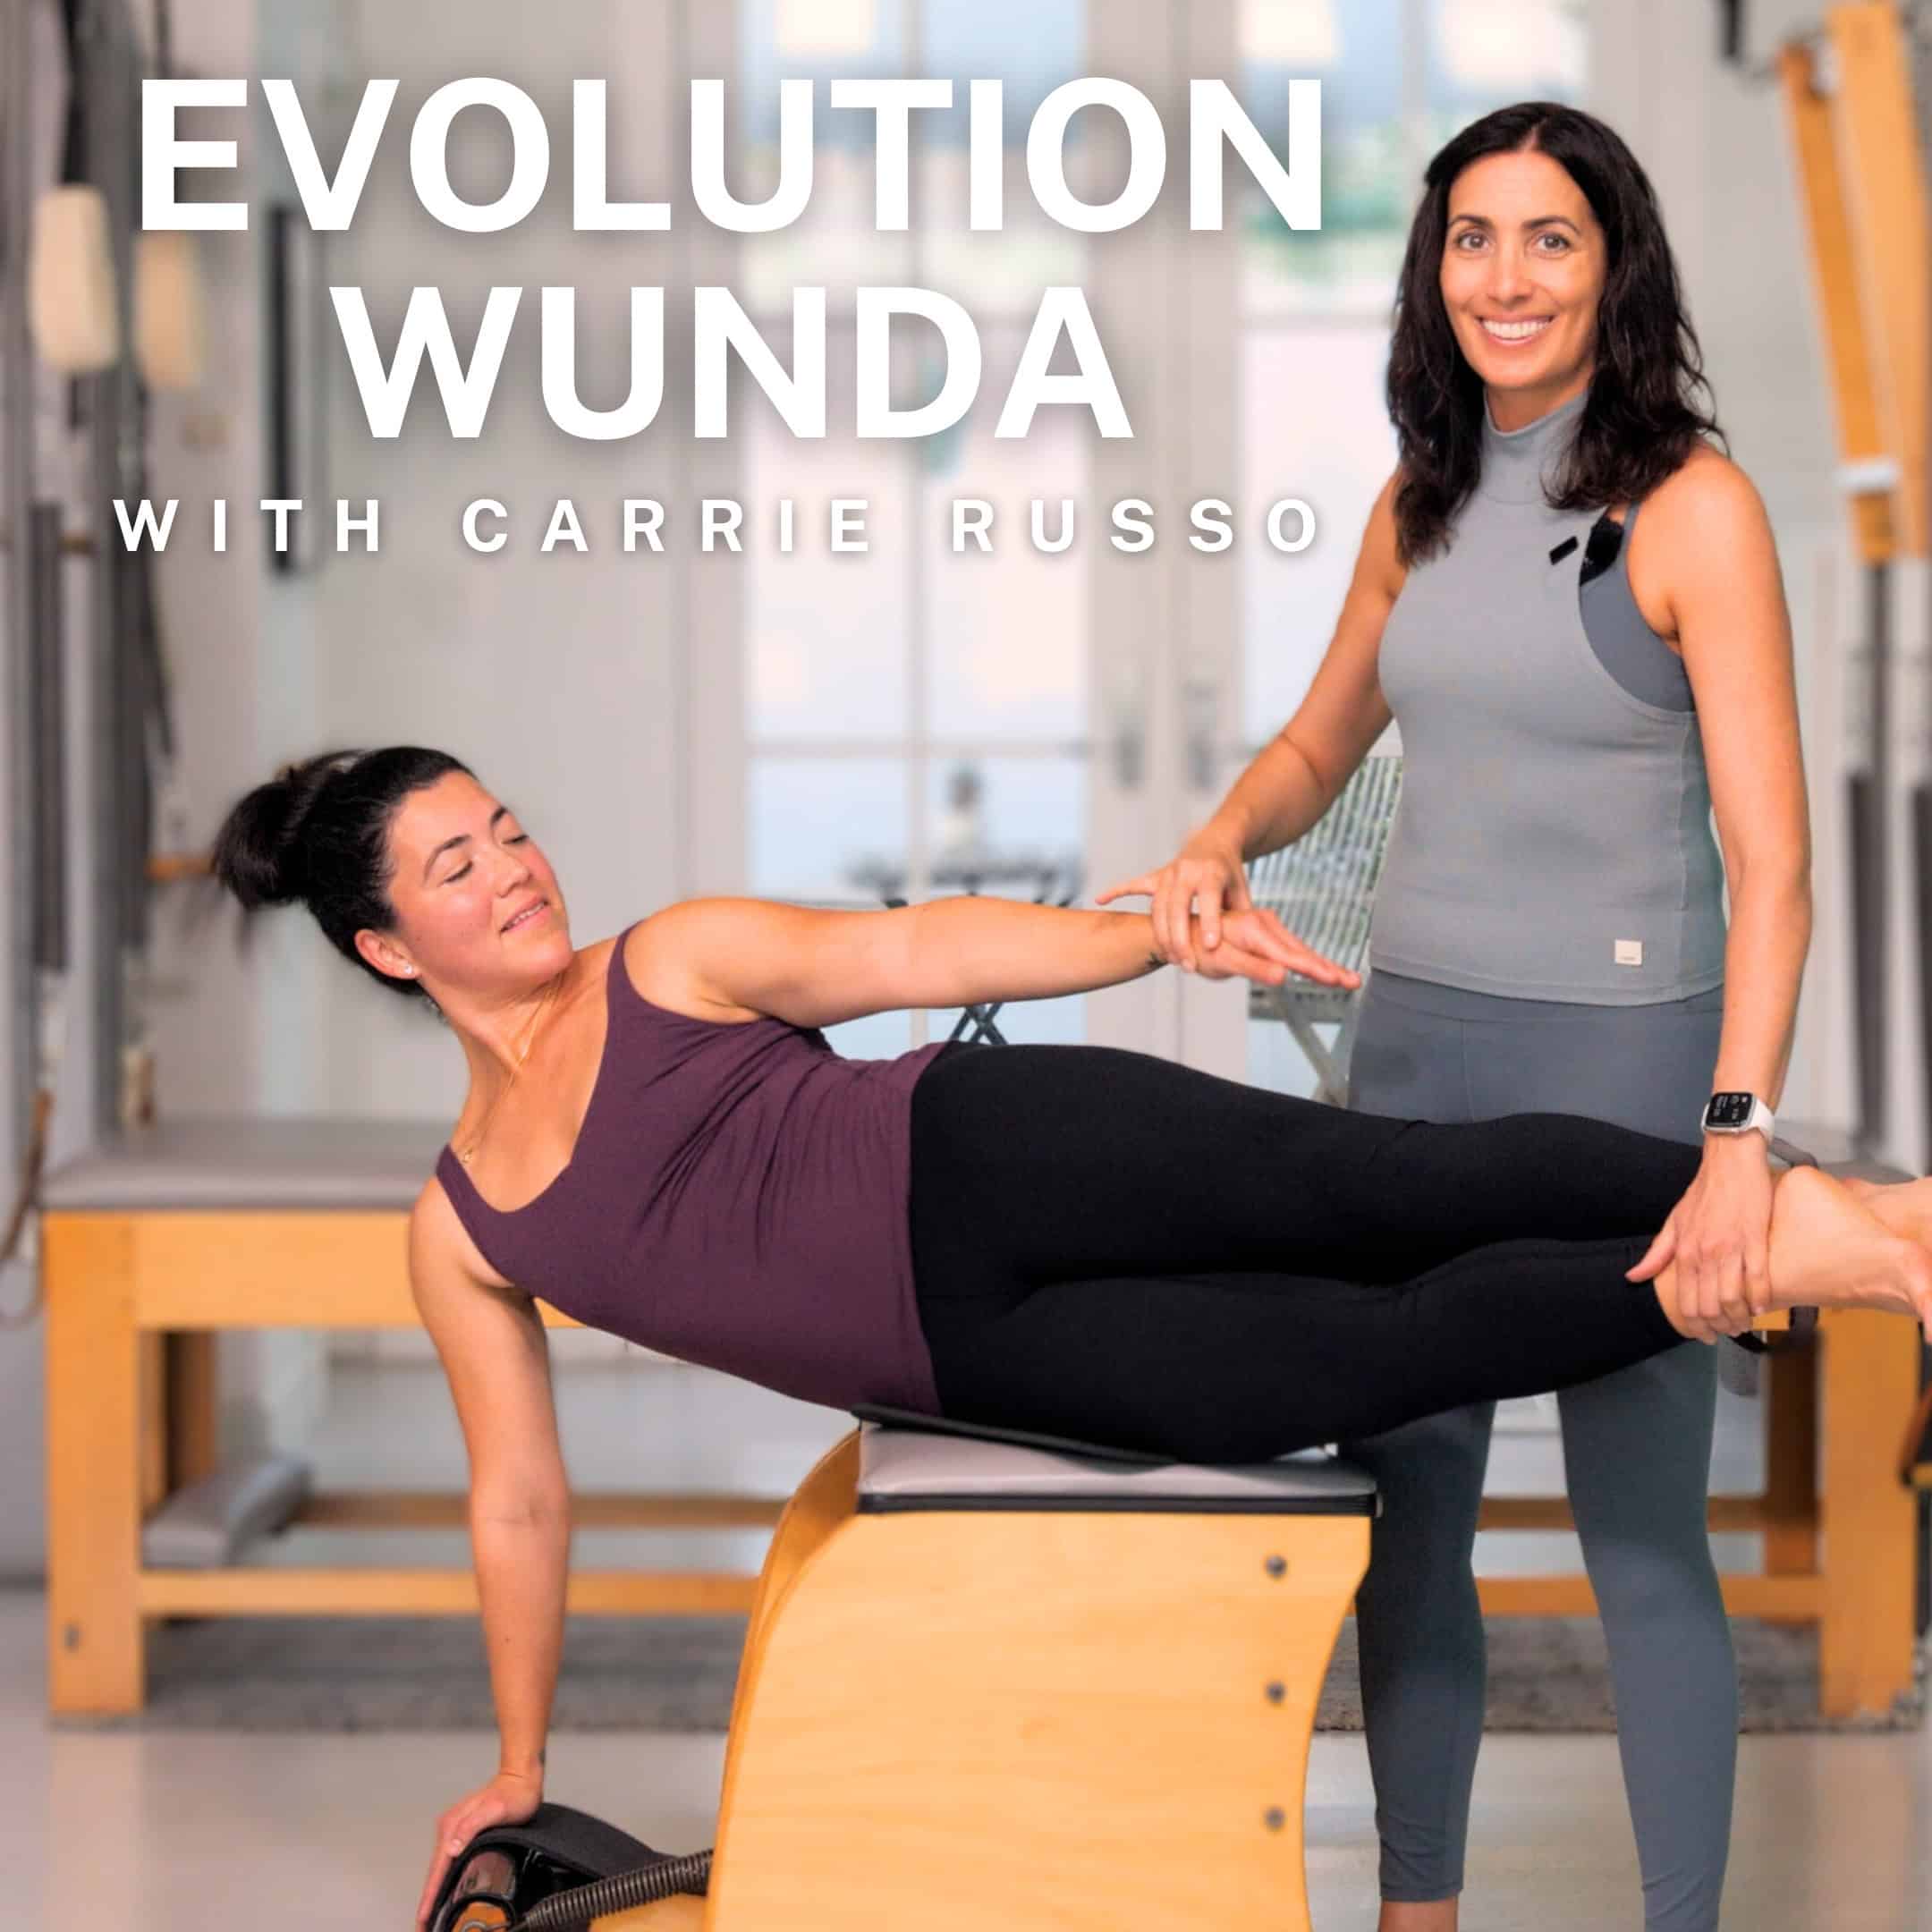 evolution wunda series with carrie russo, launching august 11